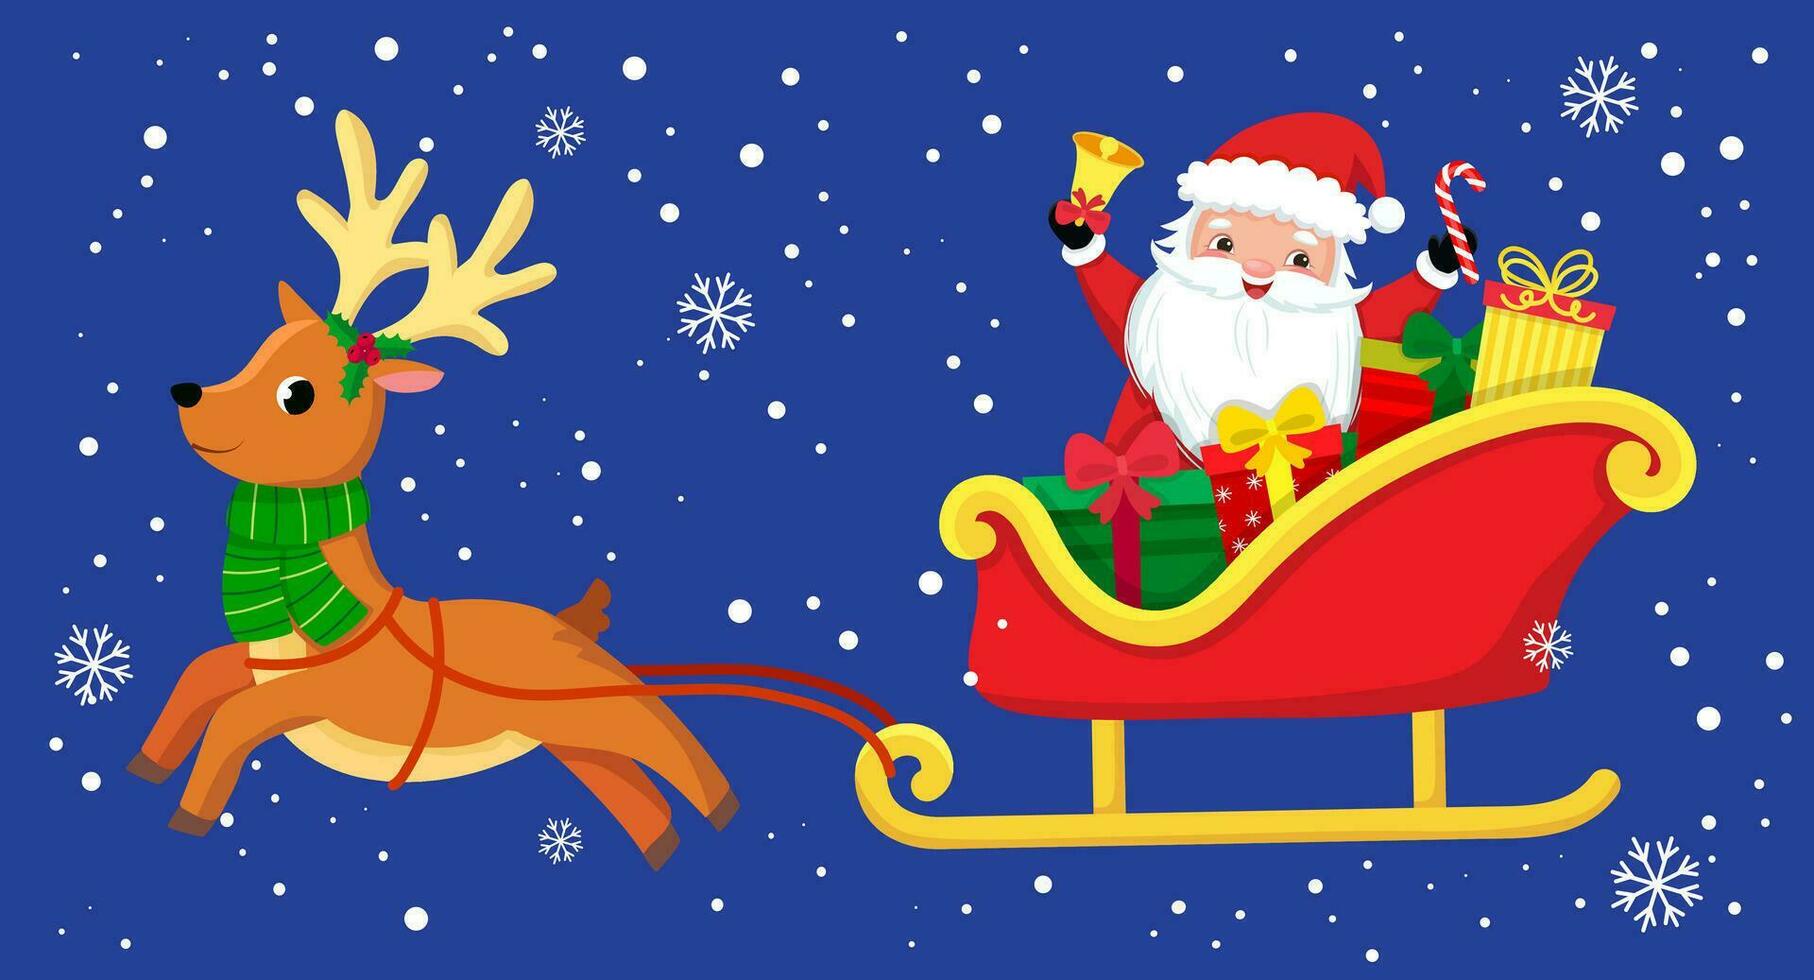 template for congratulations on christmas and new year in cartoon style. funny santa claus and items vector